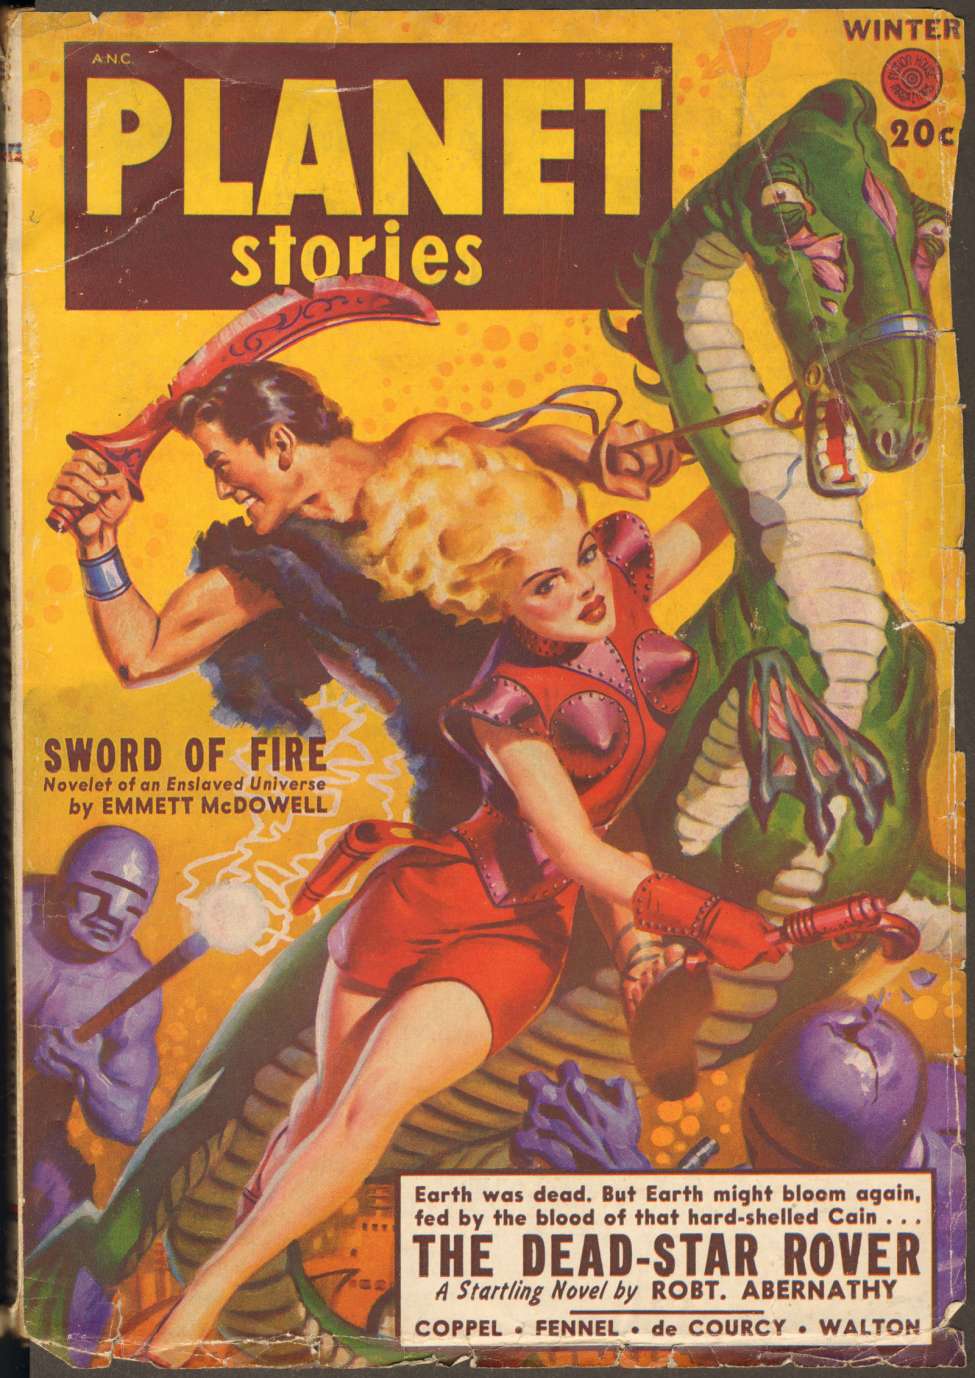 Comic Book Cover For Planet Stories v4 5 - The Dead-Star Rover - Robert Abernathy